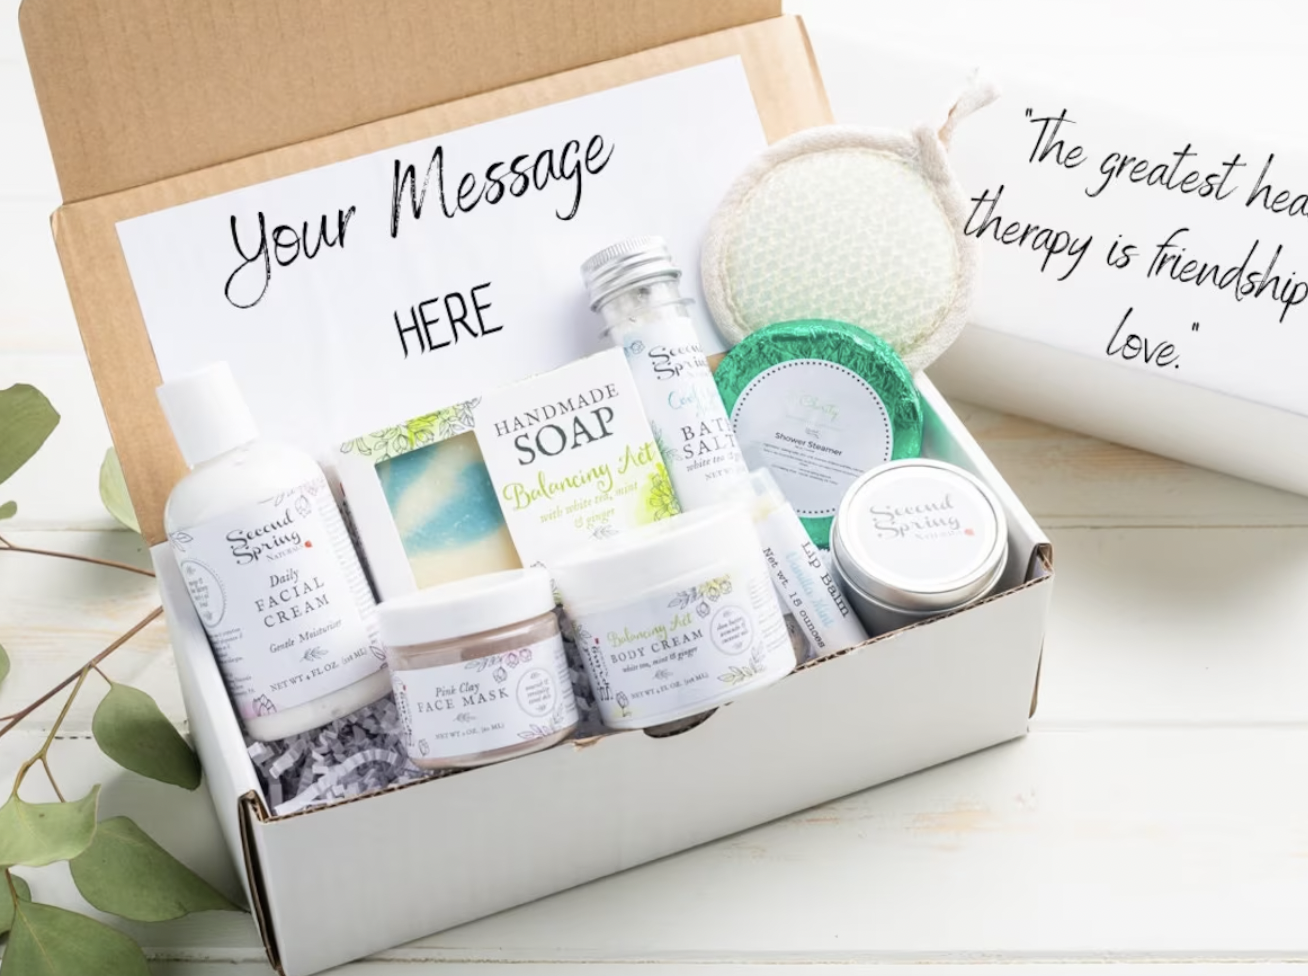  after-surgery-gifts-for-her-spa-gift-basket